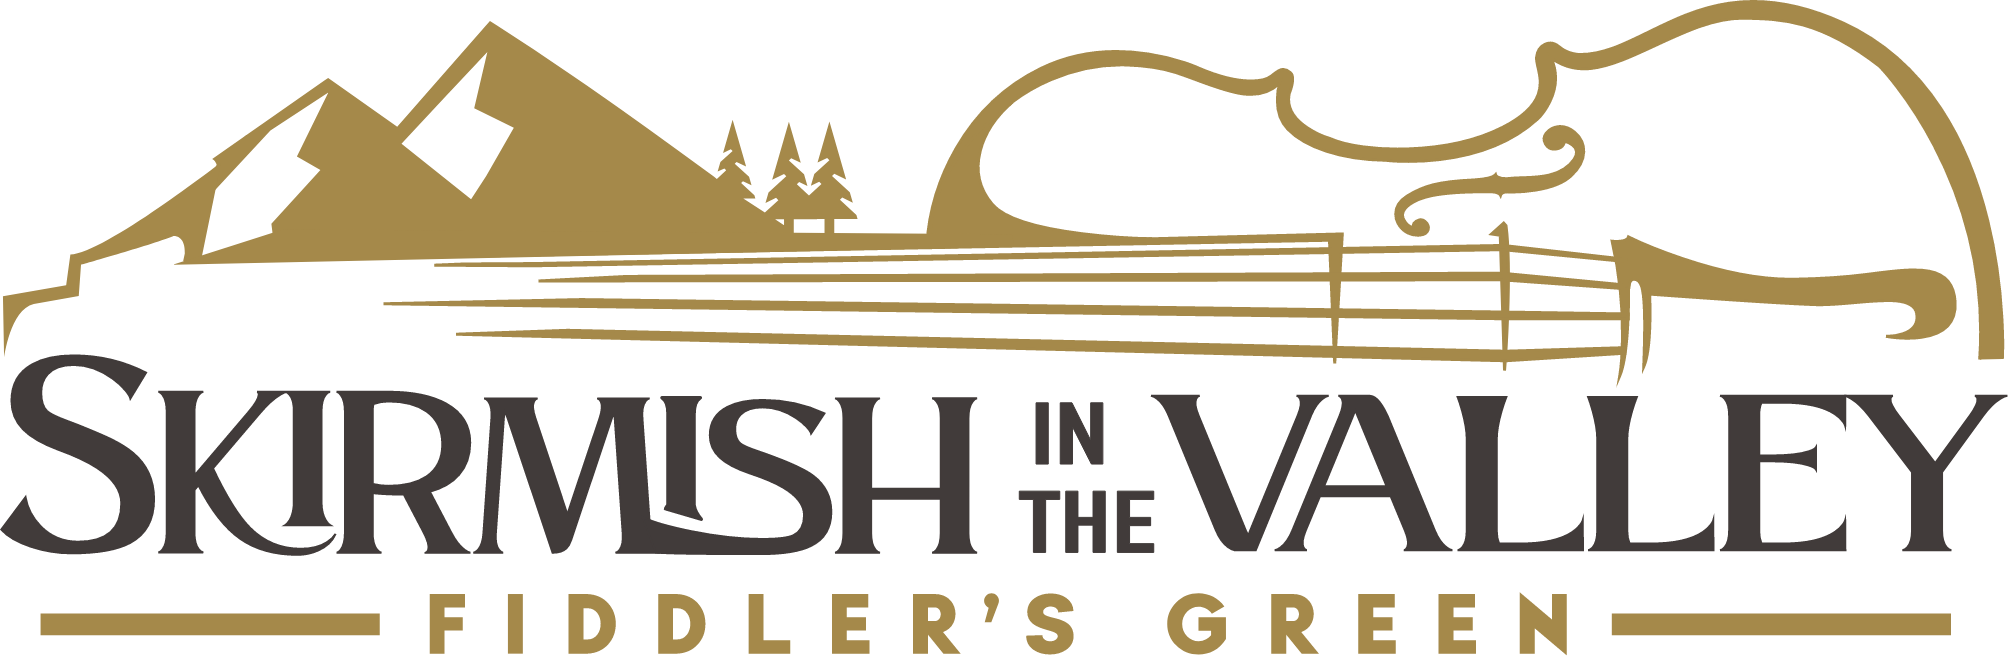 Skirmish in the Valley Logo